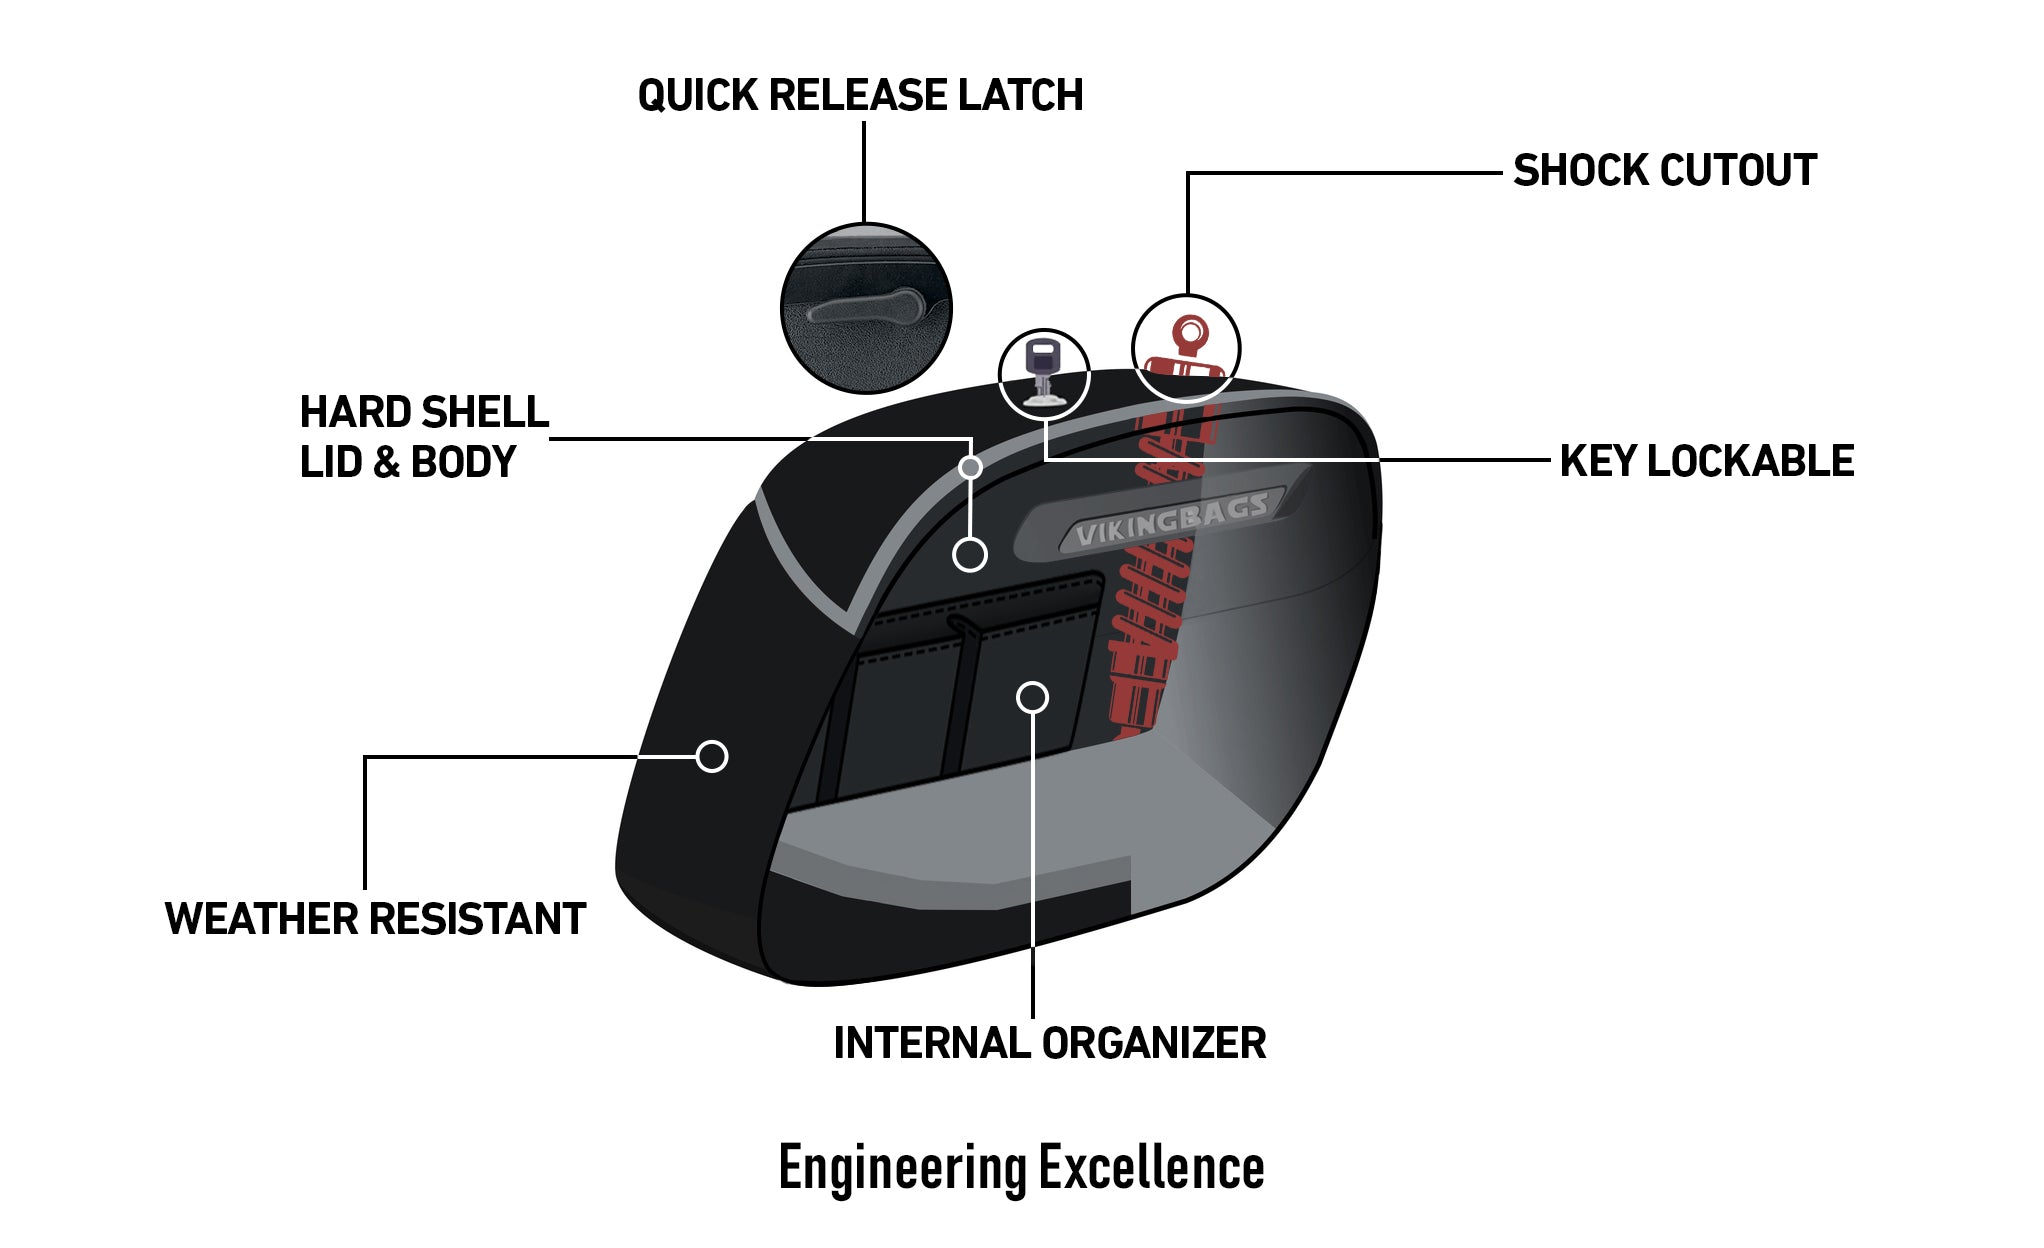 Viking Lamellar Raven Extra Large Shock Cutout Matte Hard Saddlebags For Harley Sportster 1200 Nightster Xl1200N Engineering Excellence with Bag on Bike @expand